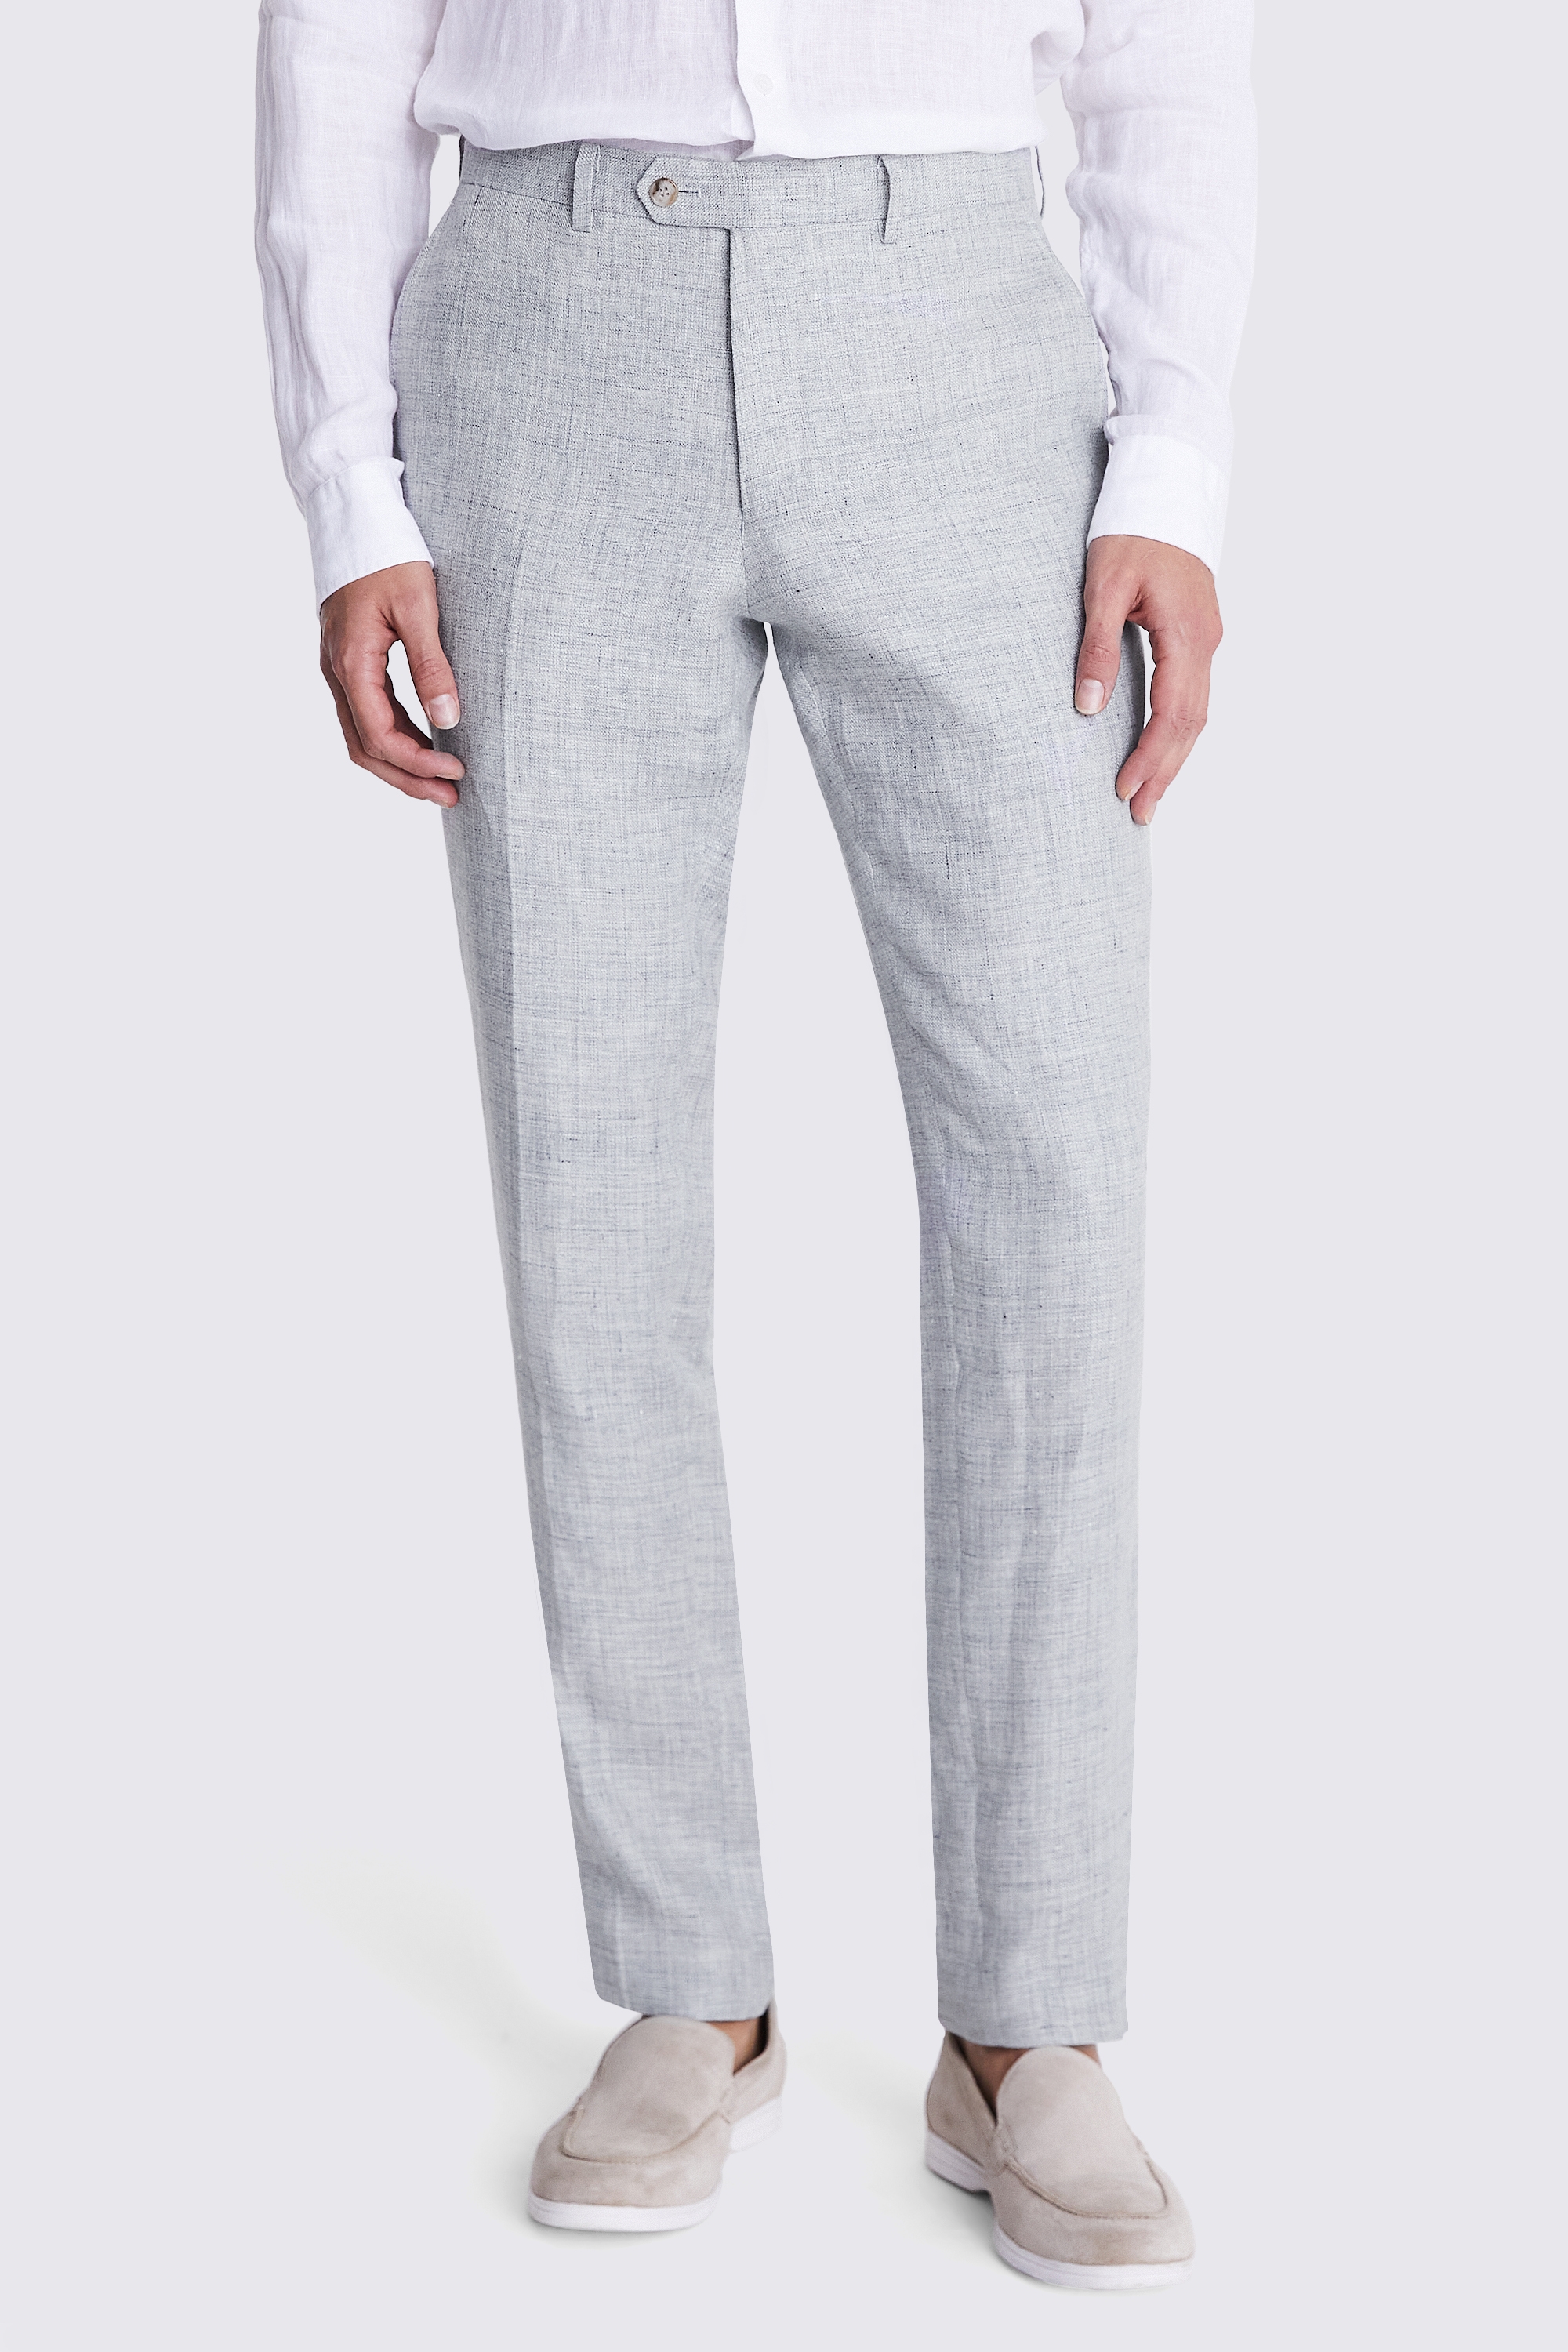 Slim Fit Light Grey Linen Trousers | Buy Online at Moss